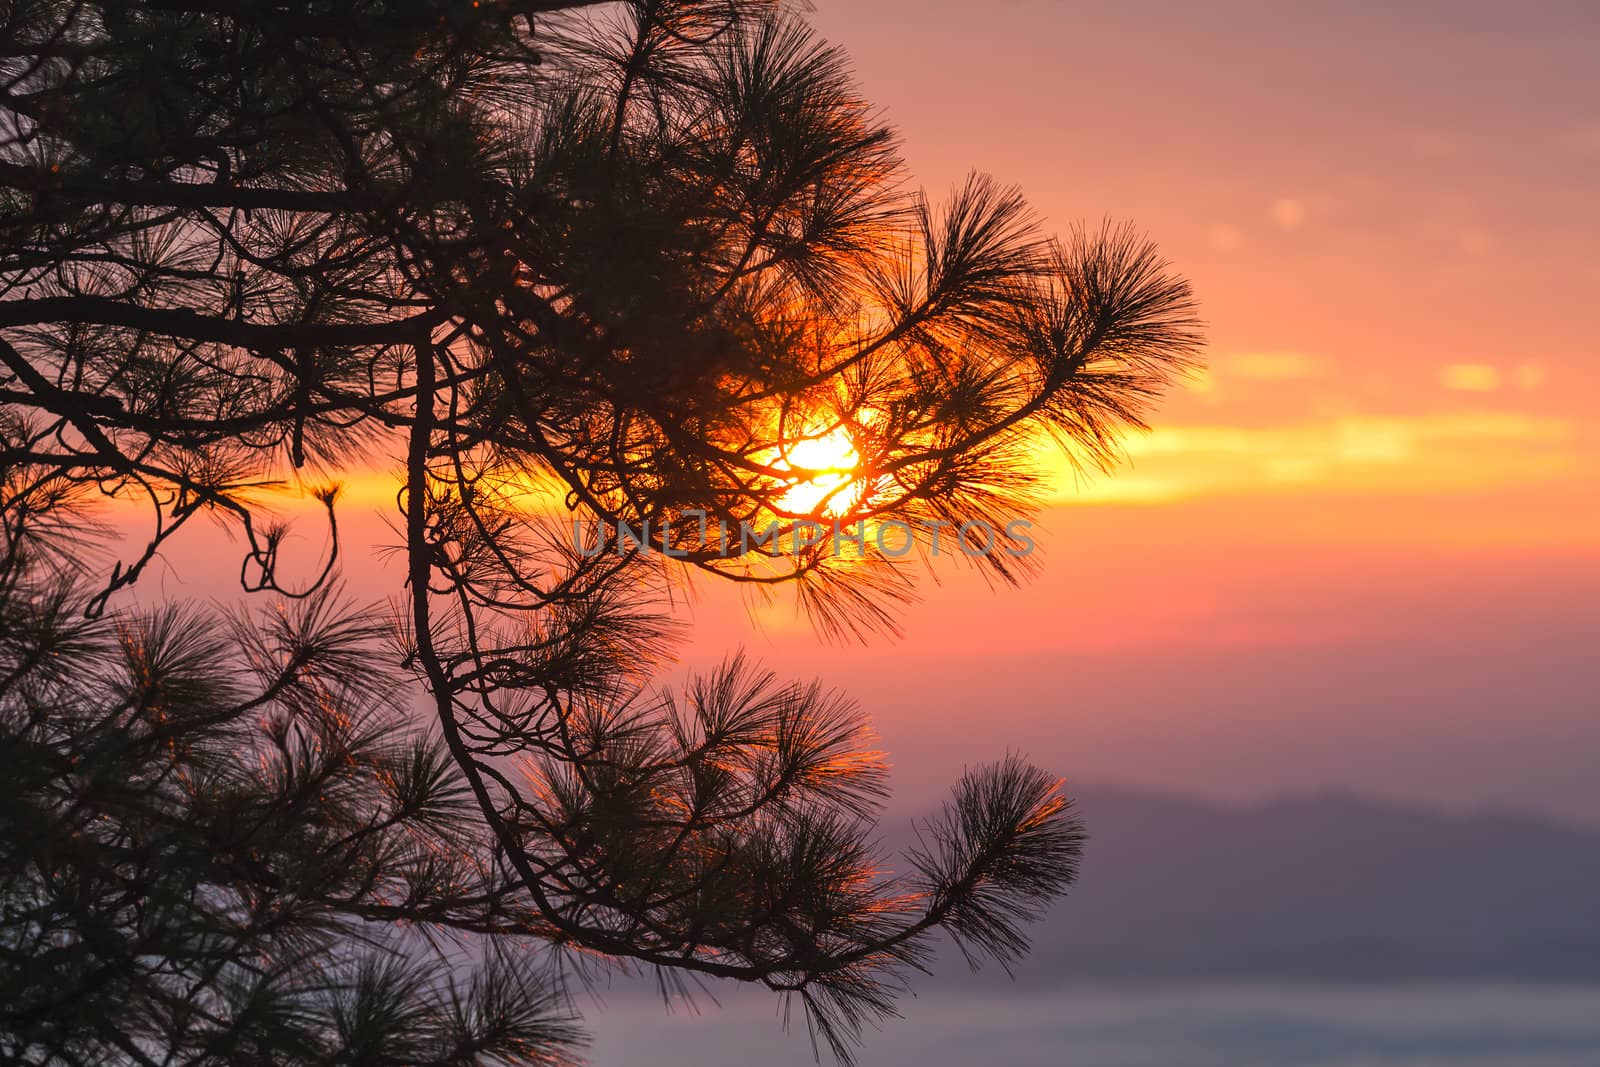 Sunset through pine branches. Nature background.